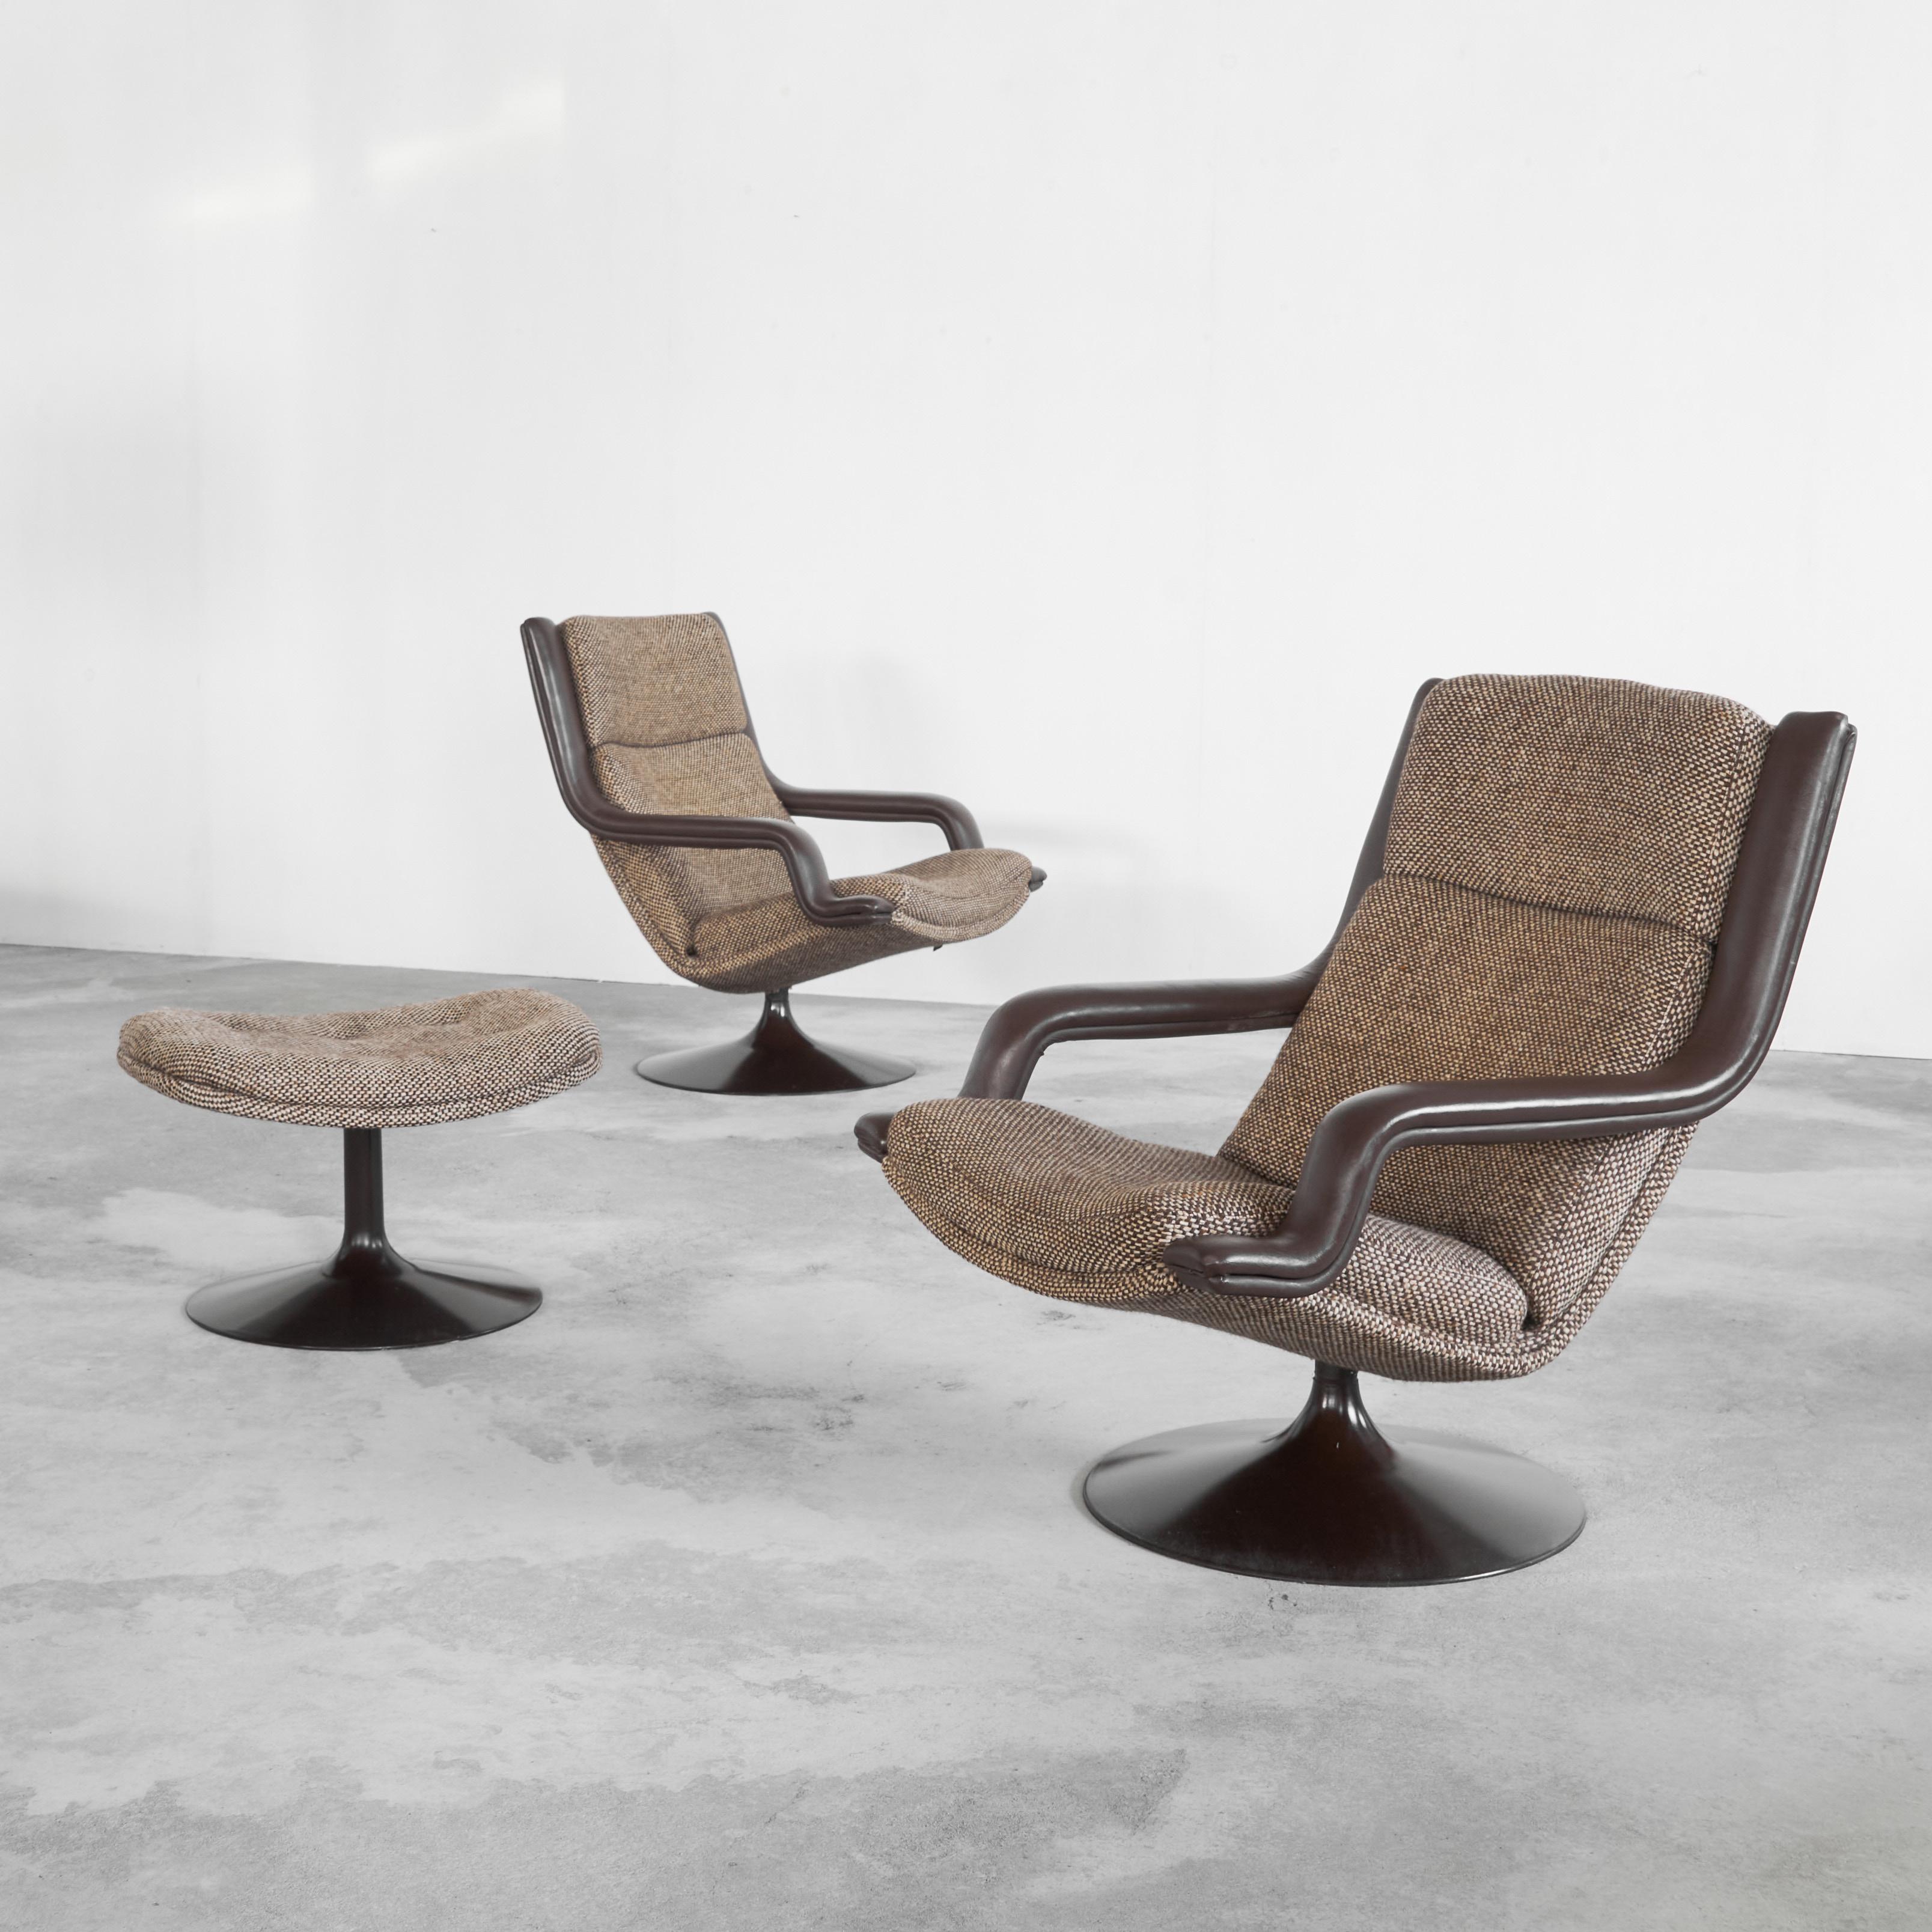 Mid-Century Modern Geoffrey Harcourt Pair of F152 Lounge Chairs with Ottoman for Artifort 1975 For Sale